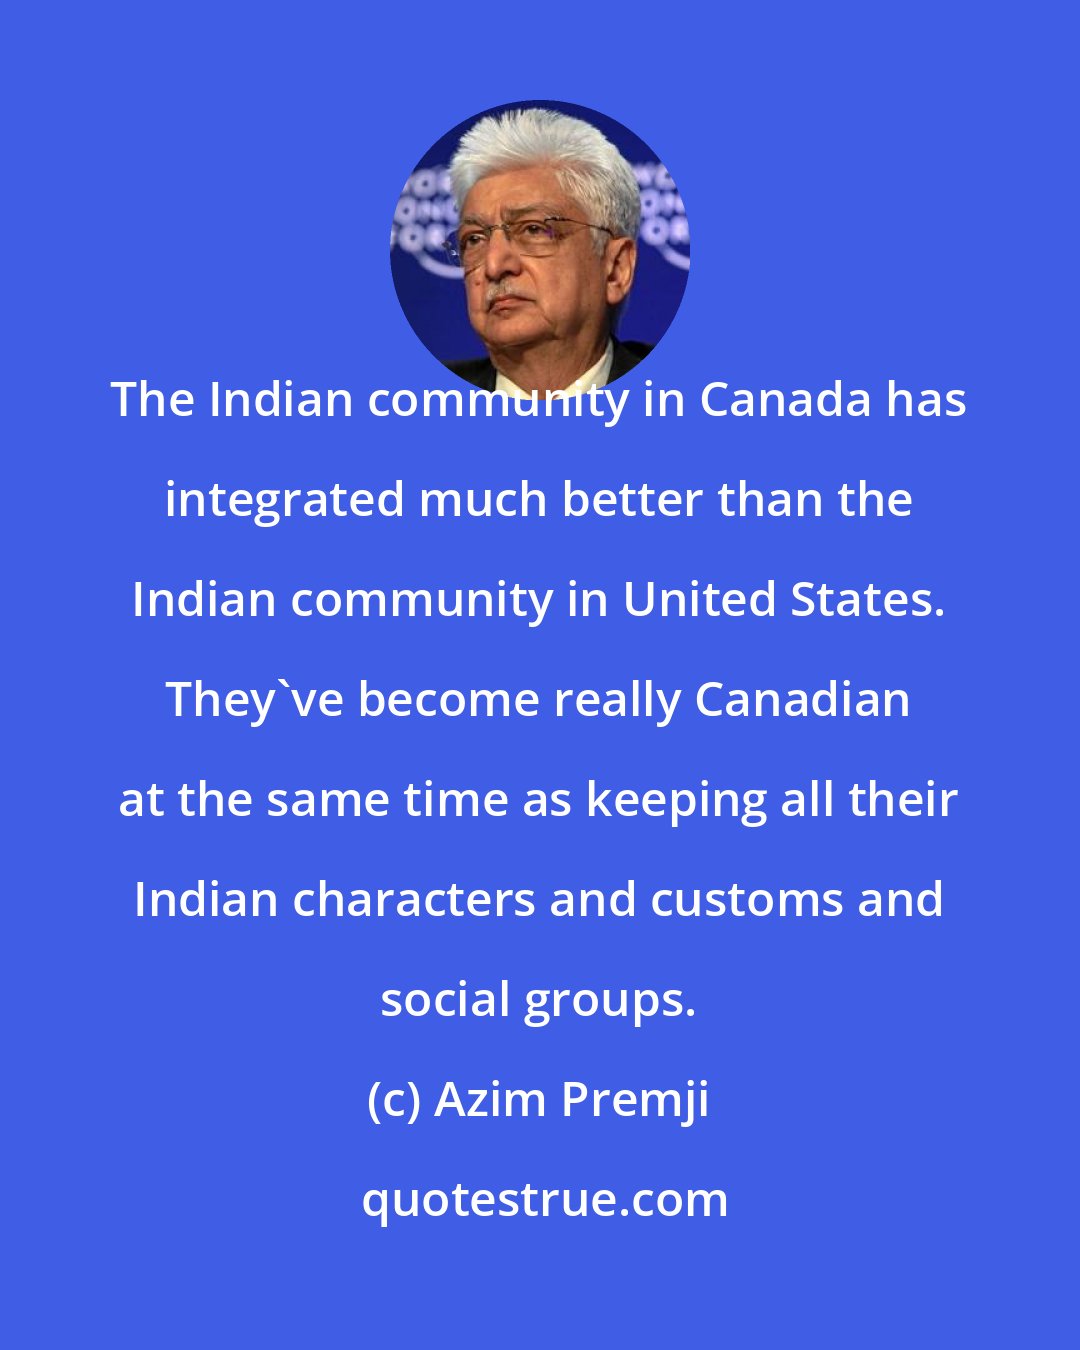 Azim Premji: The Indian community in Canada has integrated much better than the Indian community in United States. They've become really Canadian at the same time as keeping all their Indian characters and customs and social groups.